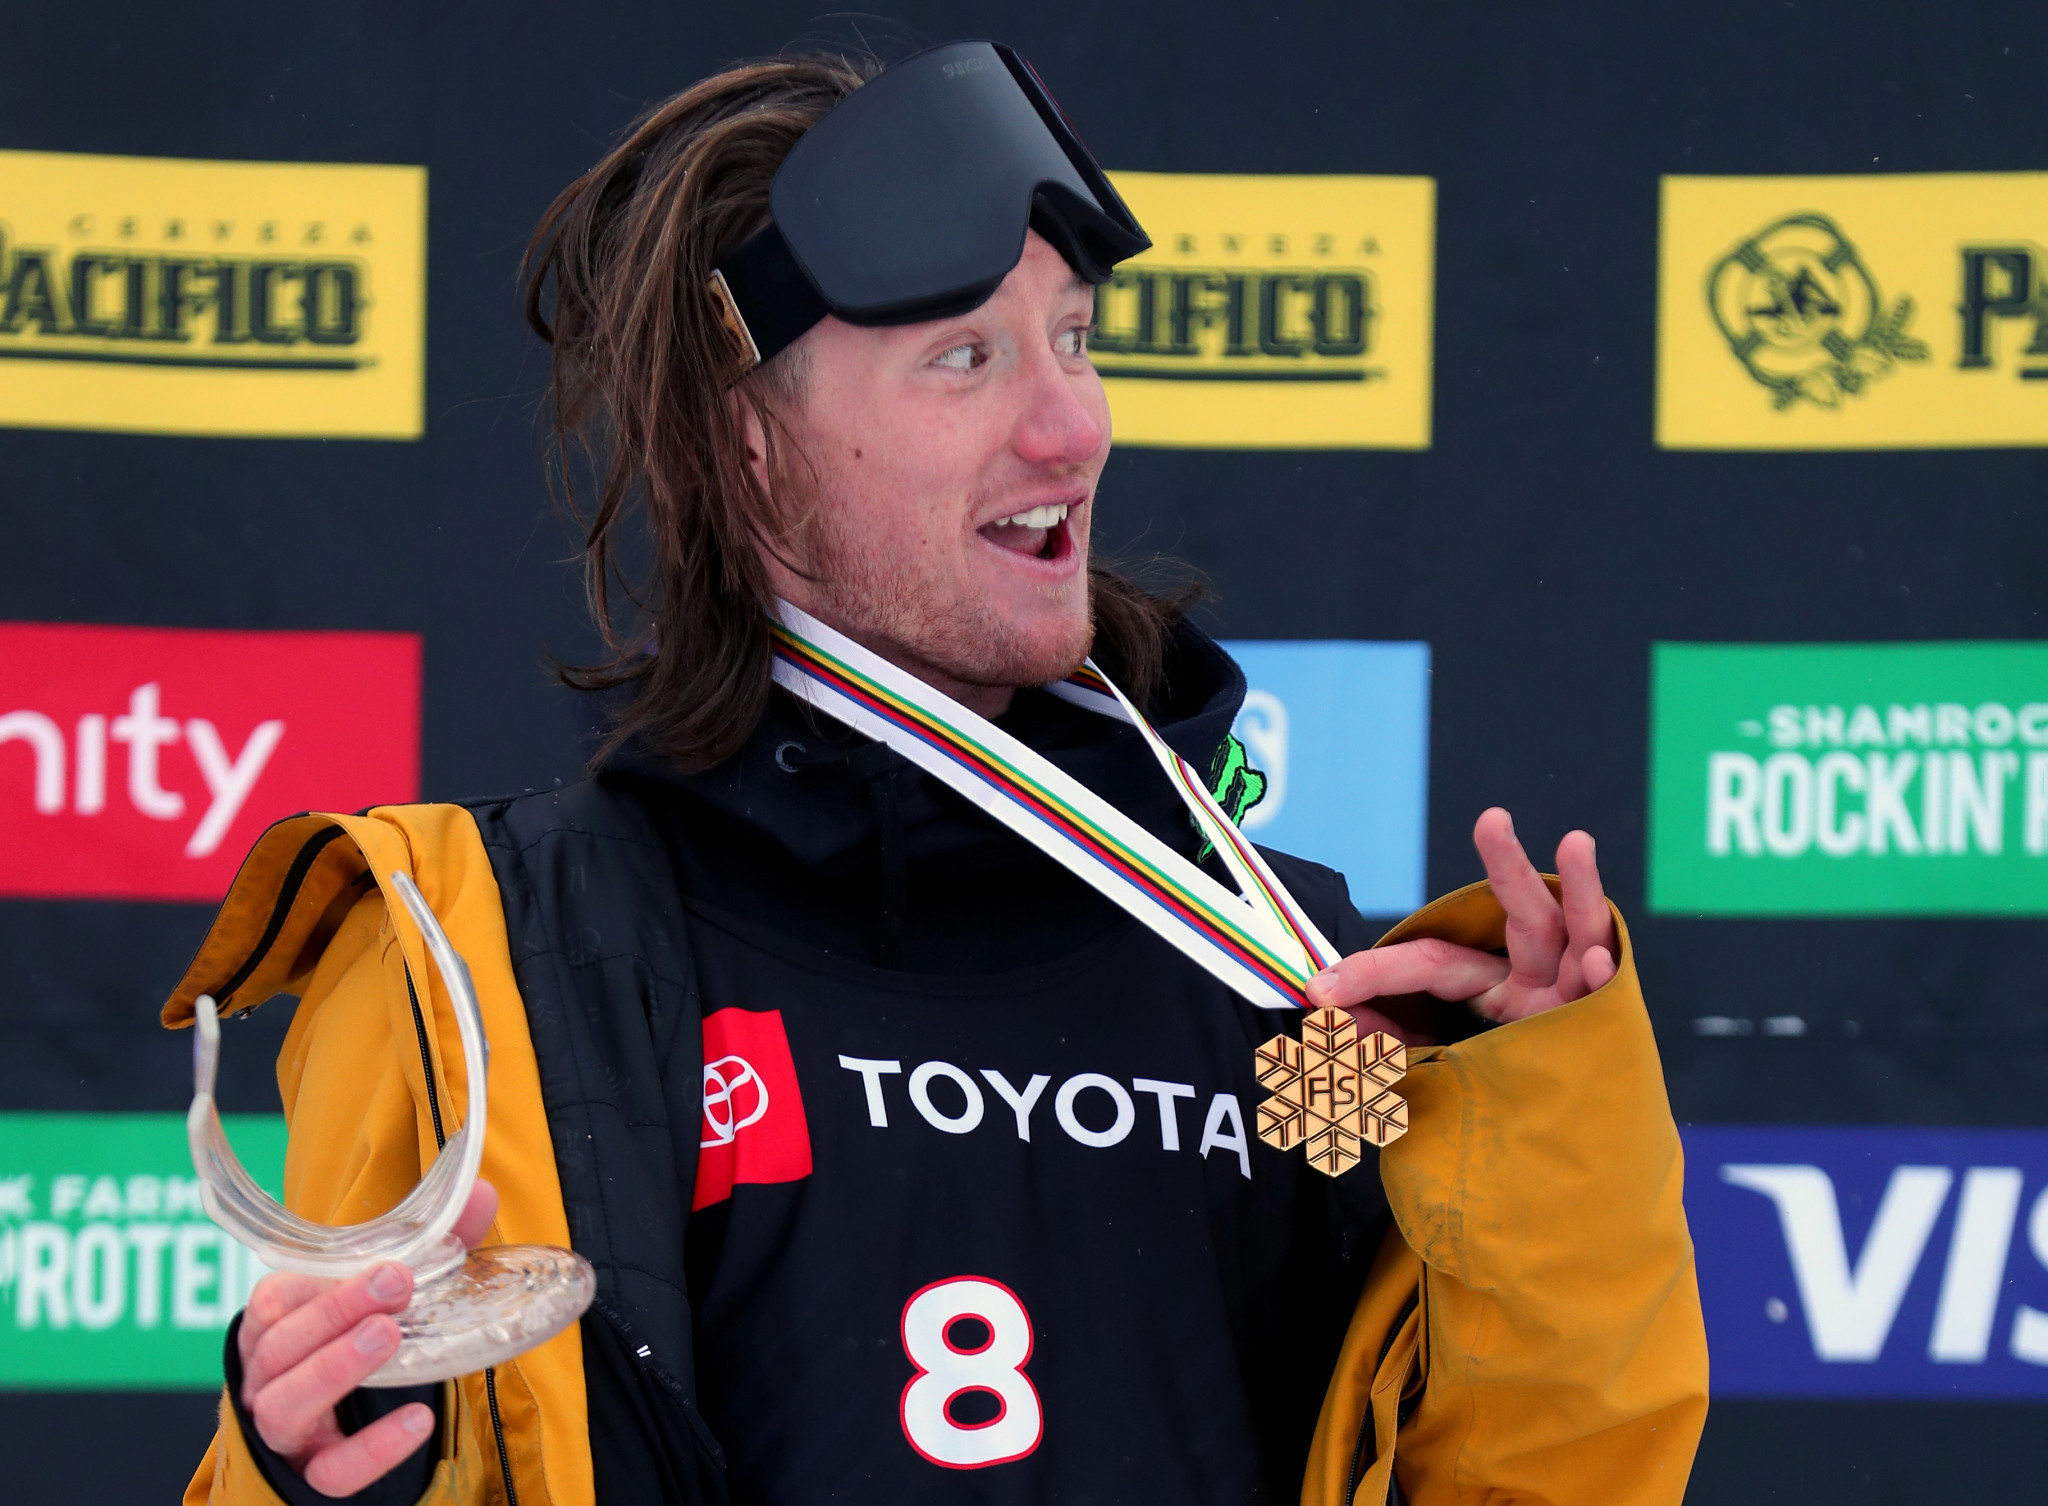 James Woods was crowned as ski slopestyle world champion ©Getty Images